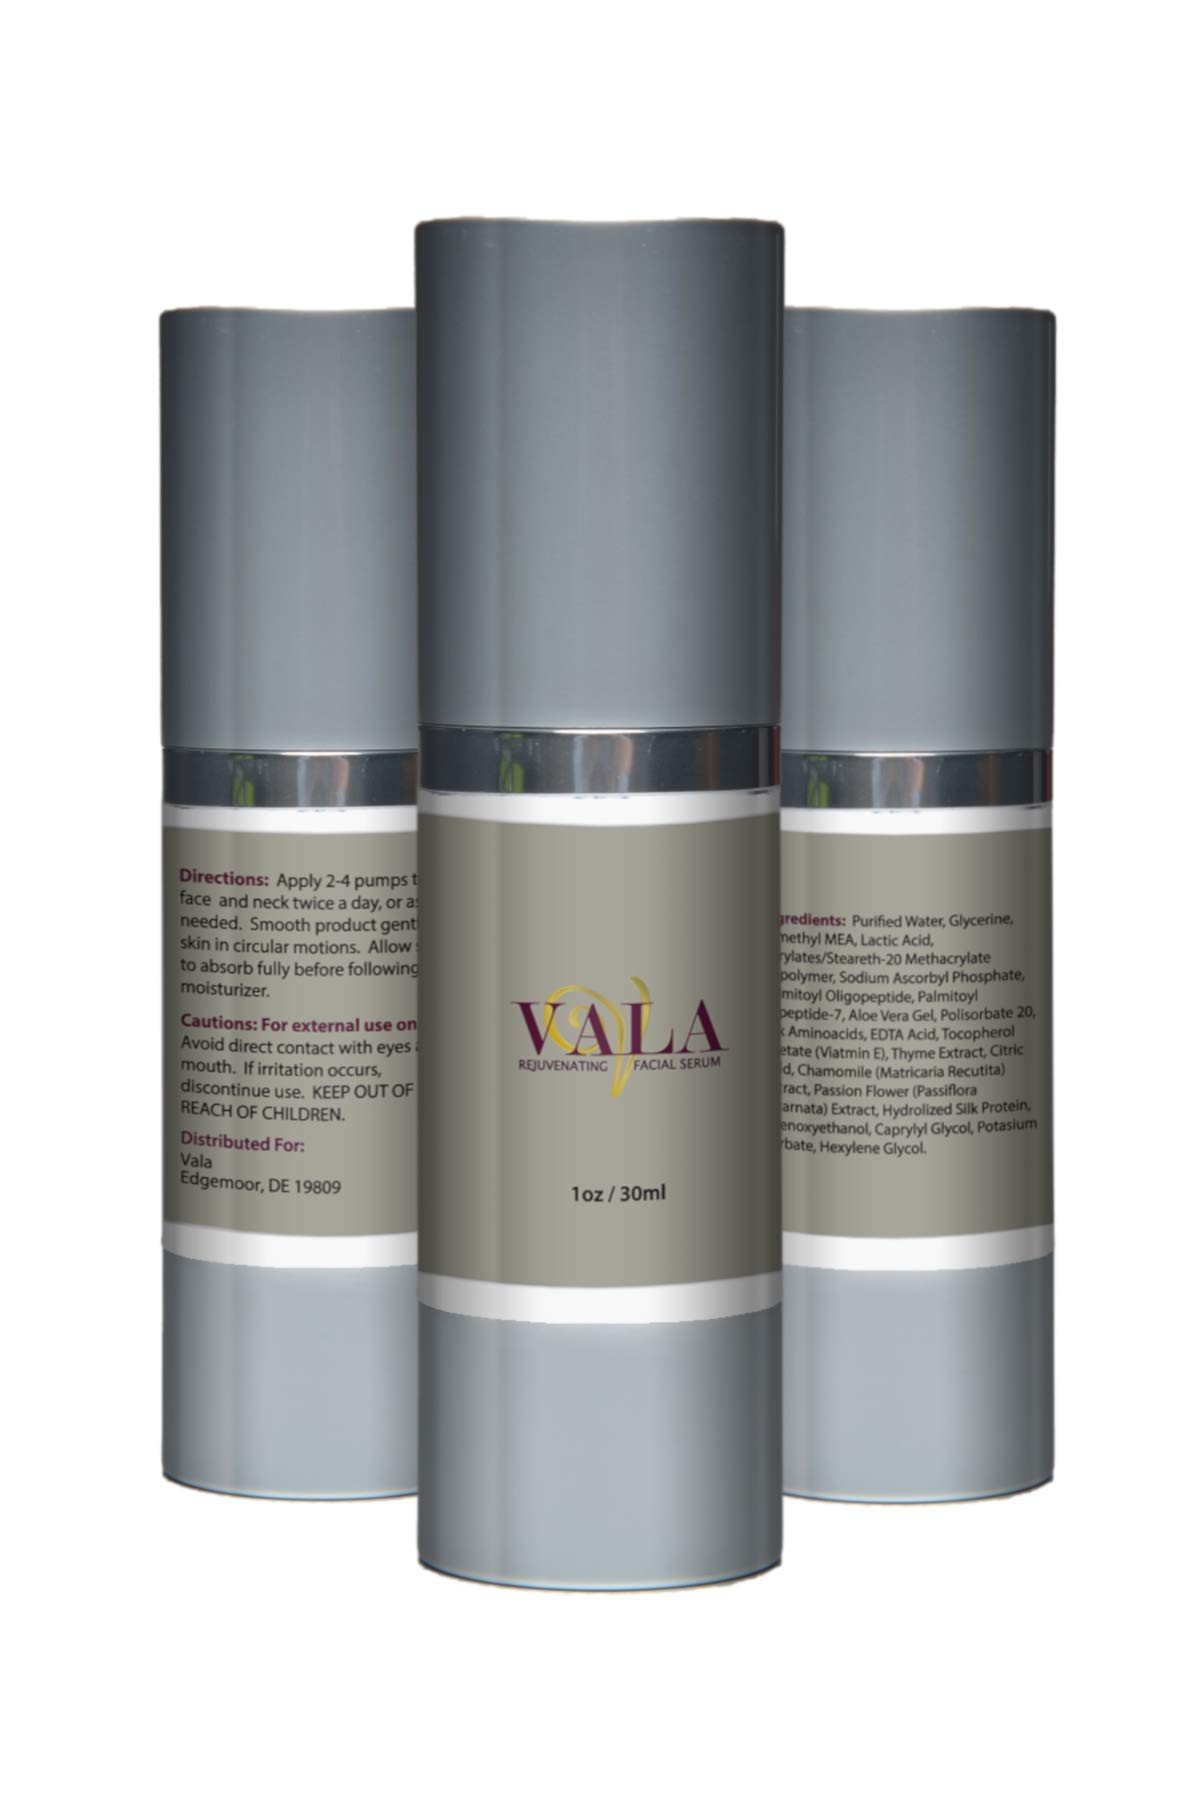 Vala Revitalizing Facial Serum, Skin Care for the Face to Reduce Wrinkles and Lift Skin